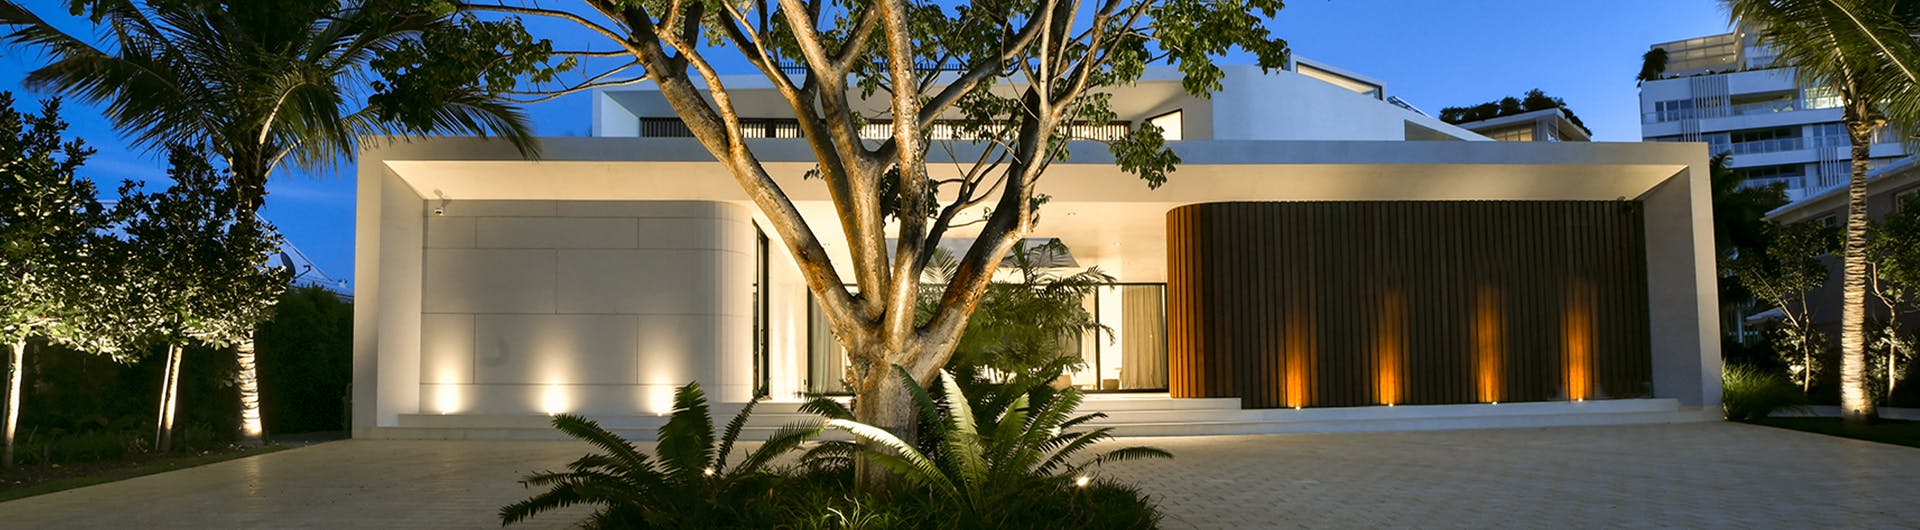 exterior of modern house with landscape accent lights shining on house and uplighting landscaping